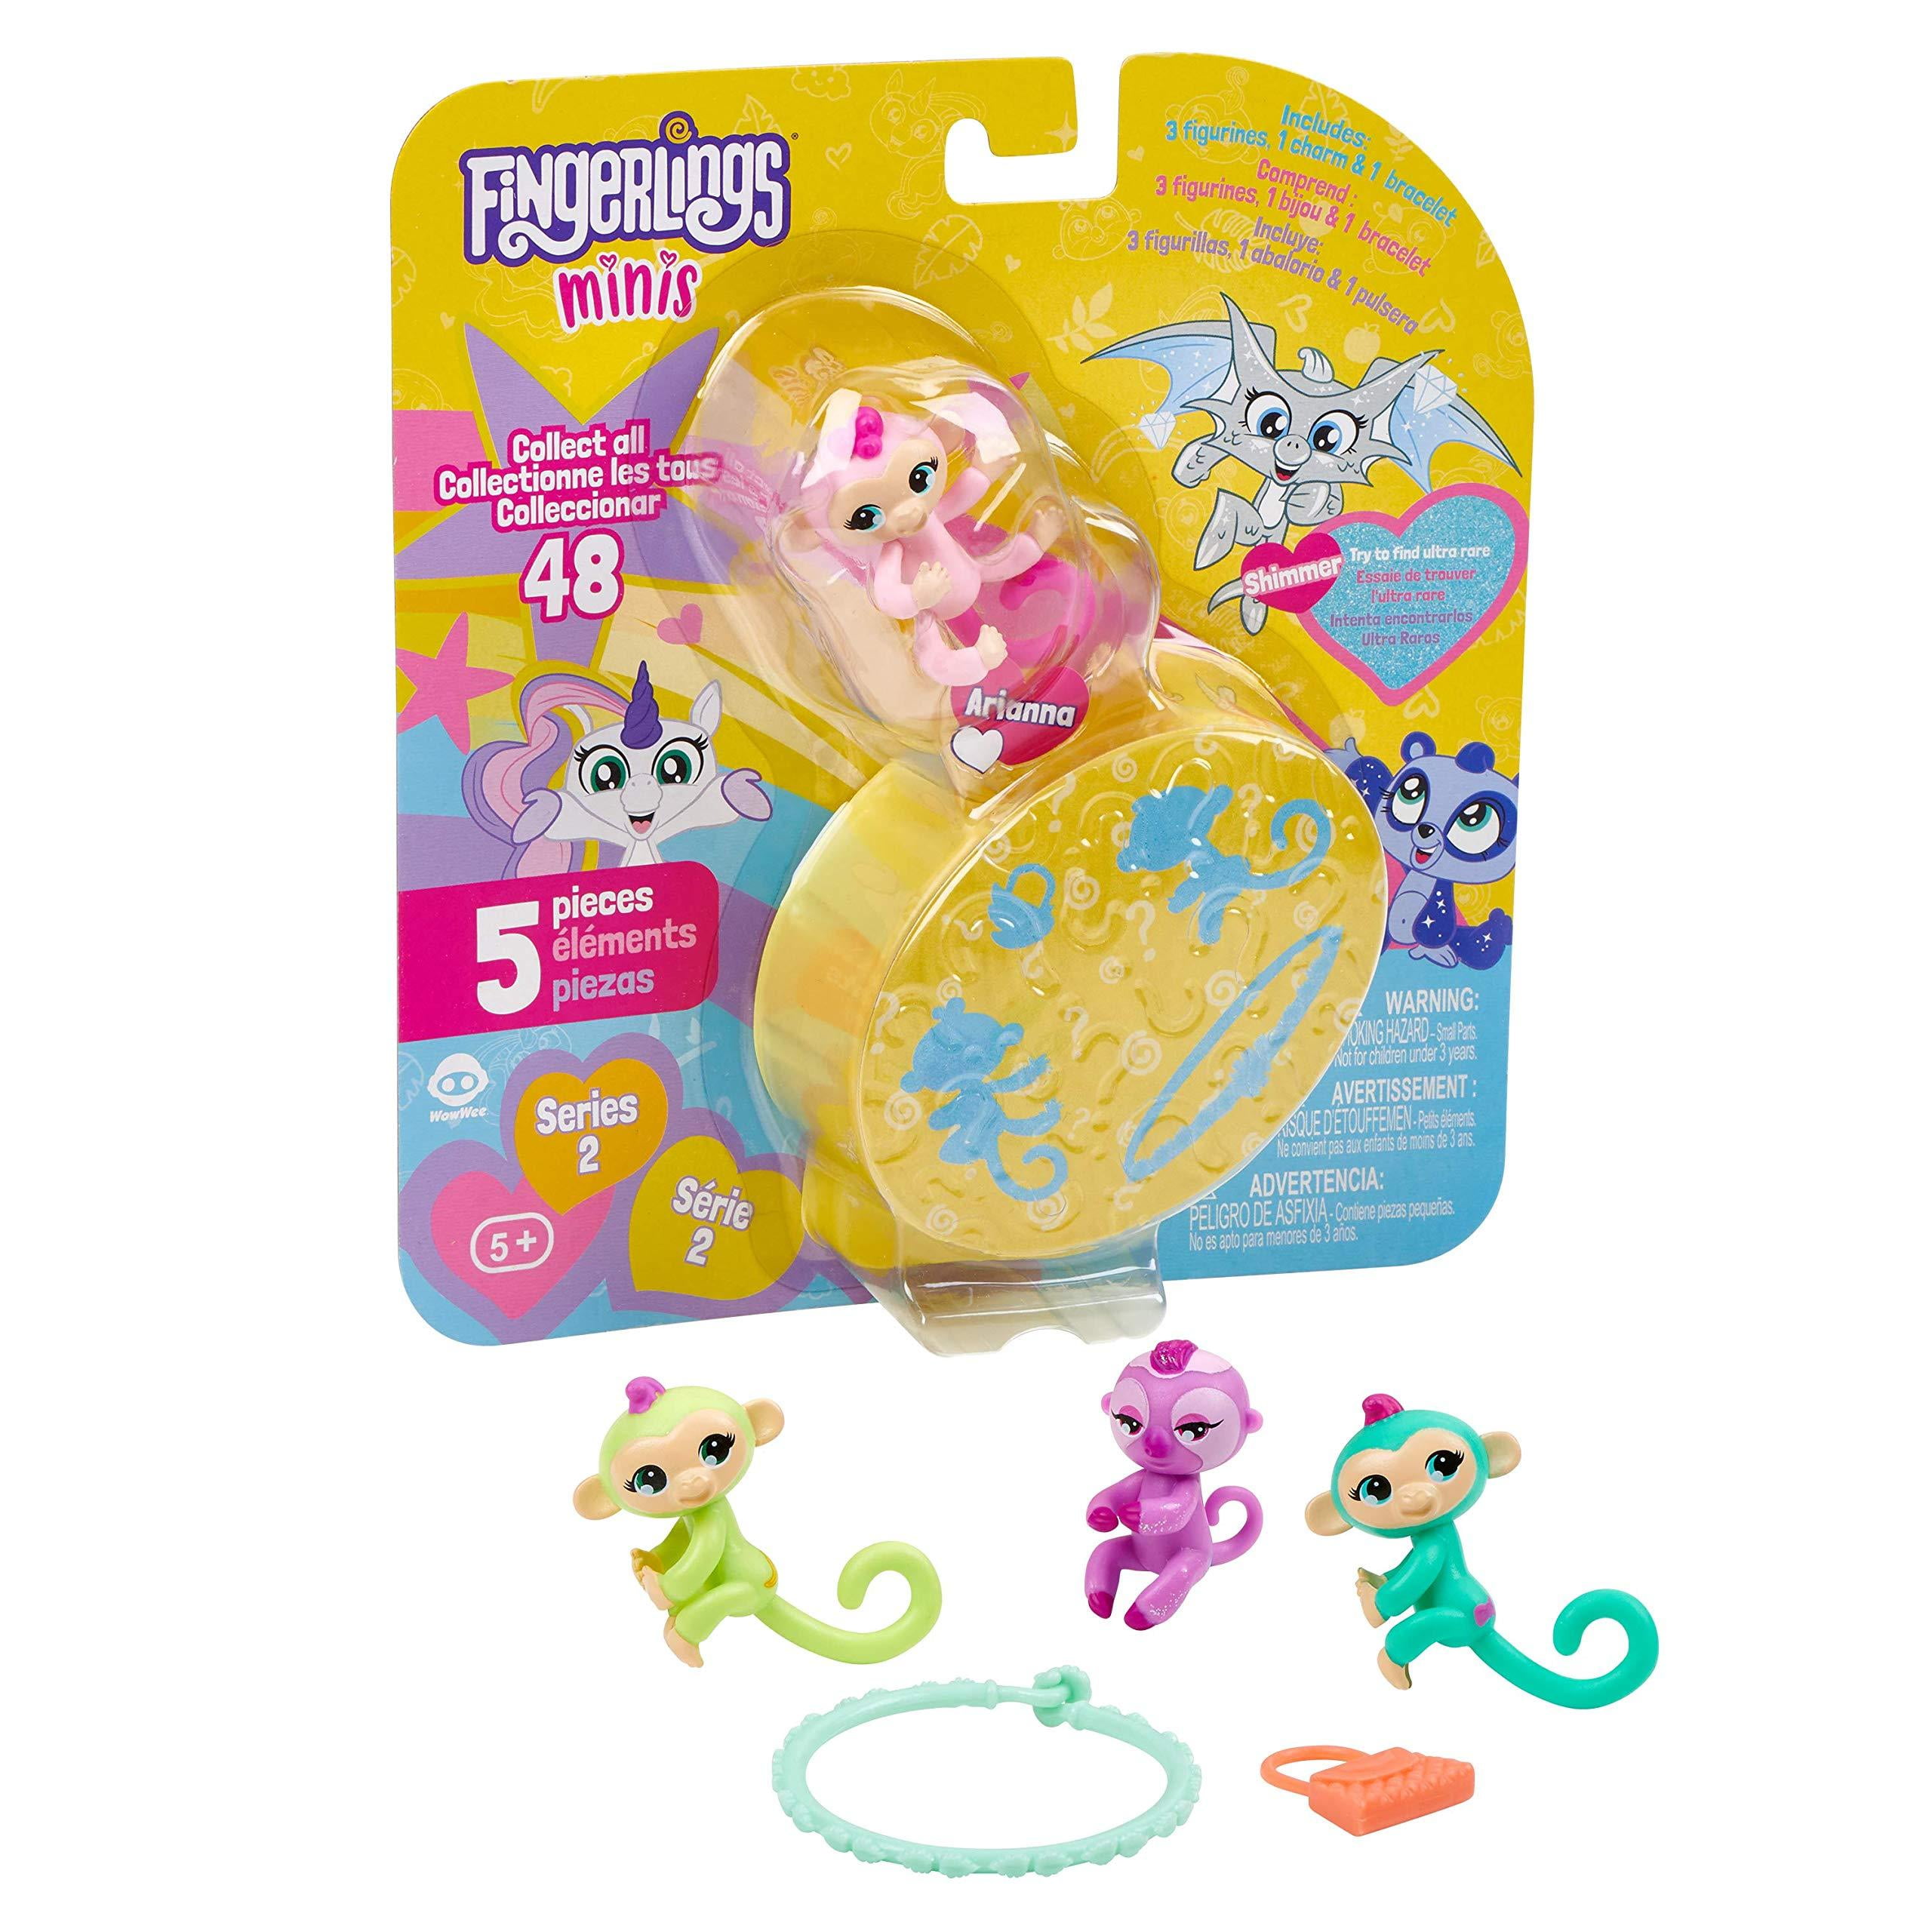 Fingerlings Mini Series 2 Figures Each Comes with Braclet & Charm Buyers Choice 